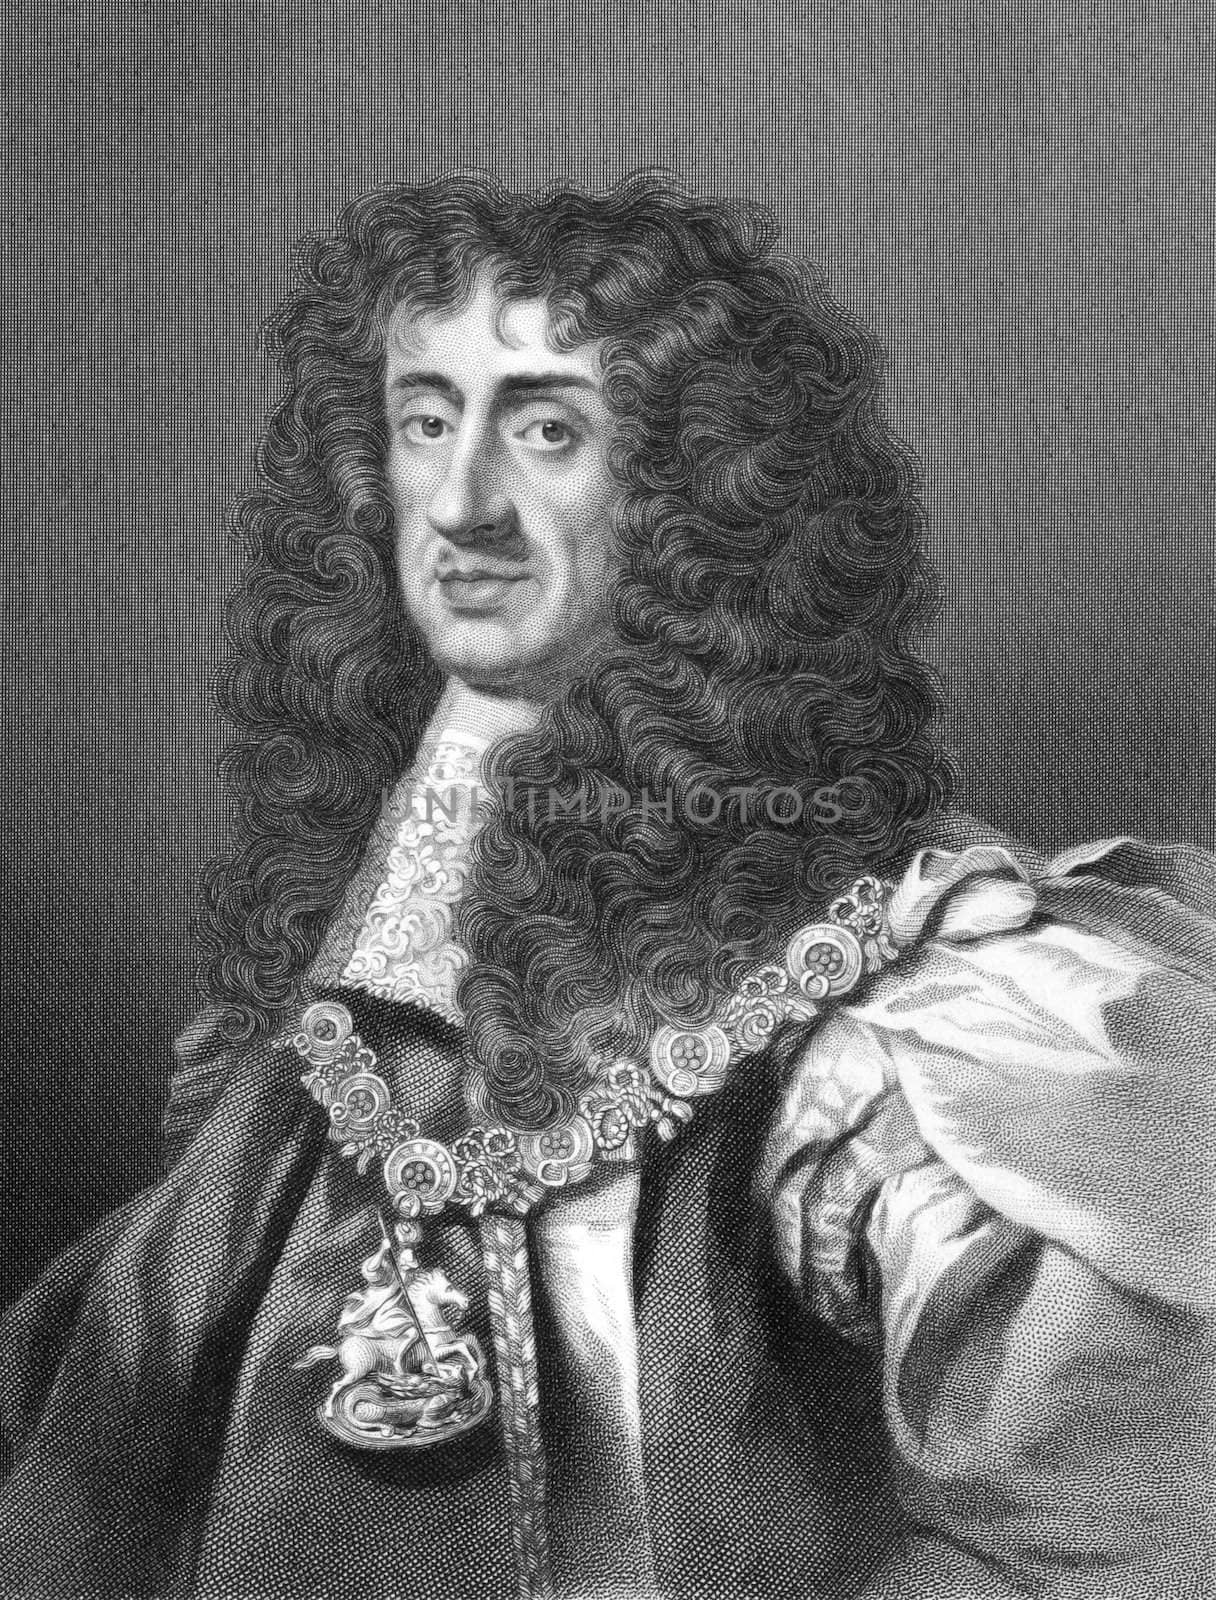 Charles II (1630-1685) on engraving from the 1800s. King of England, Scotland and Ireland during 1660-1685. Engraved by W.Holl and published in London by W.Mackenzie.